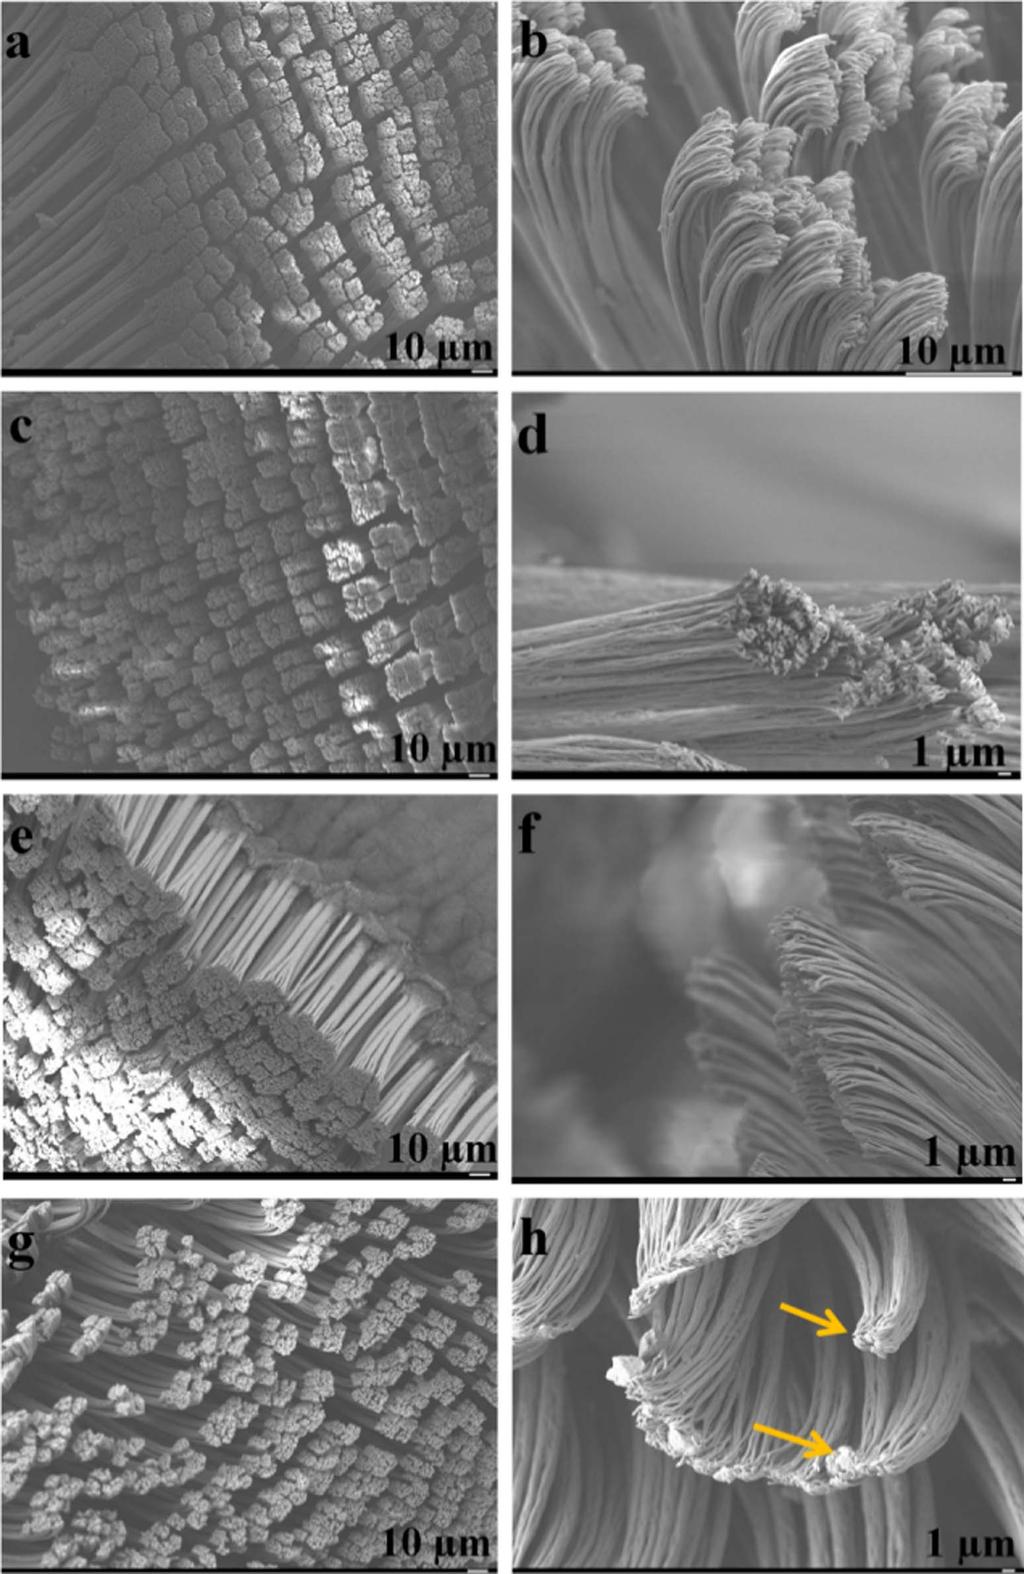 Figure 1 SEM images of untreated and coated sheds. SEM images of B-S (a,b), M-S (c,d), F-S (e,f) and P-S (g,h) samples.